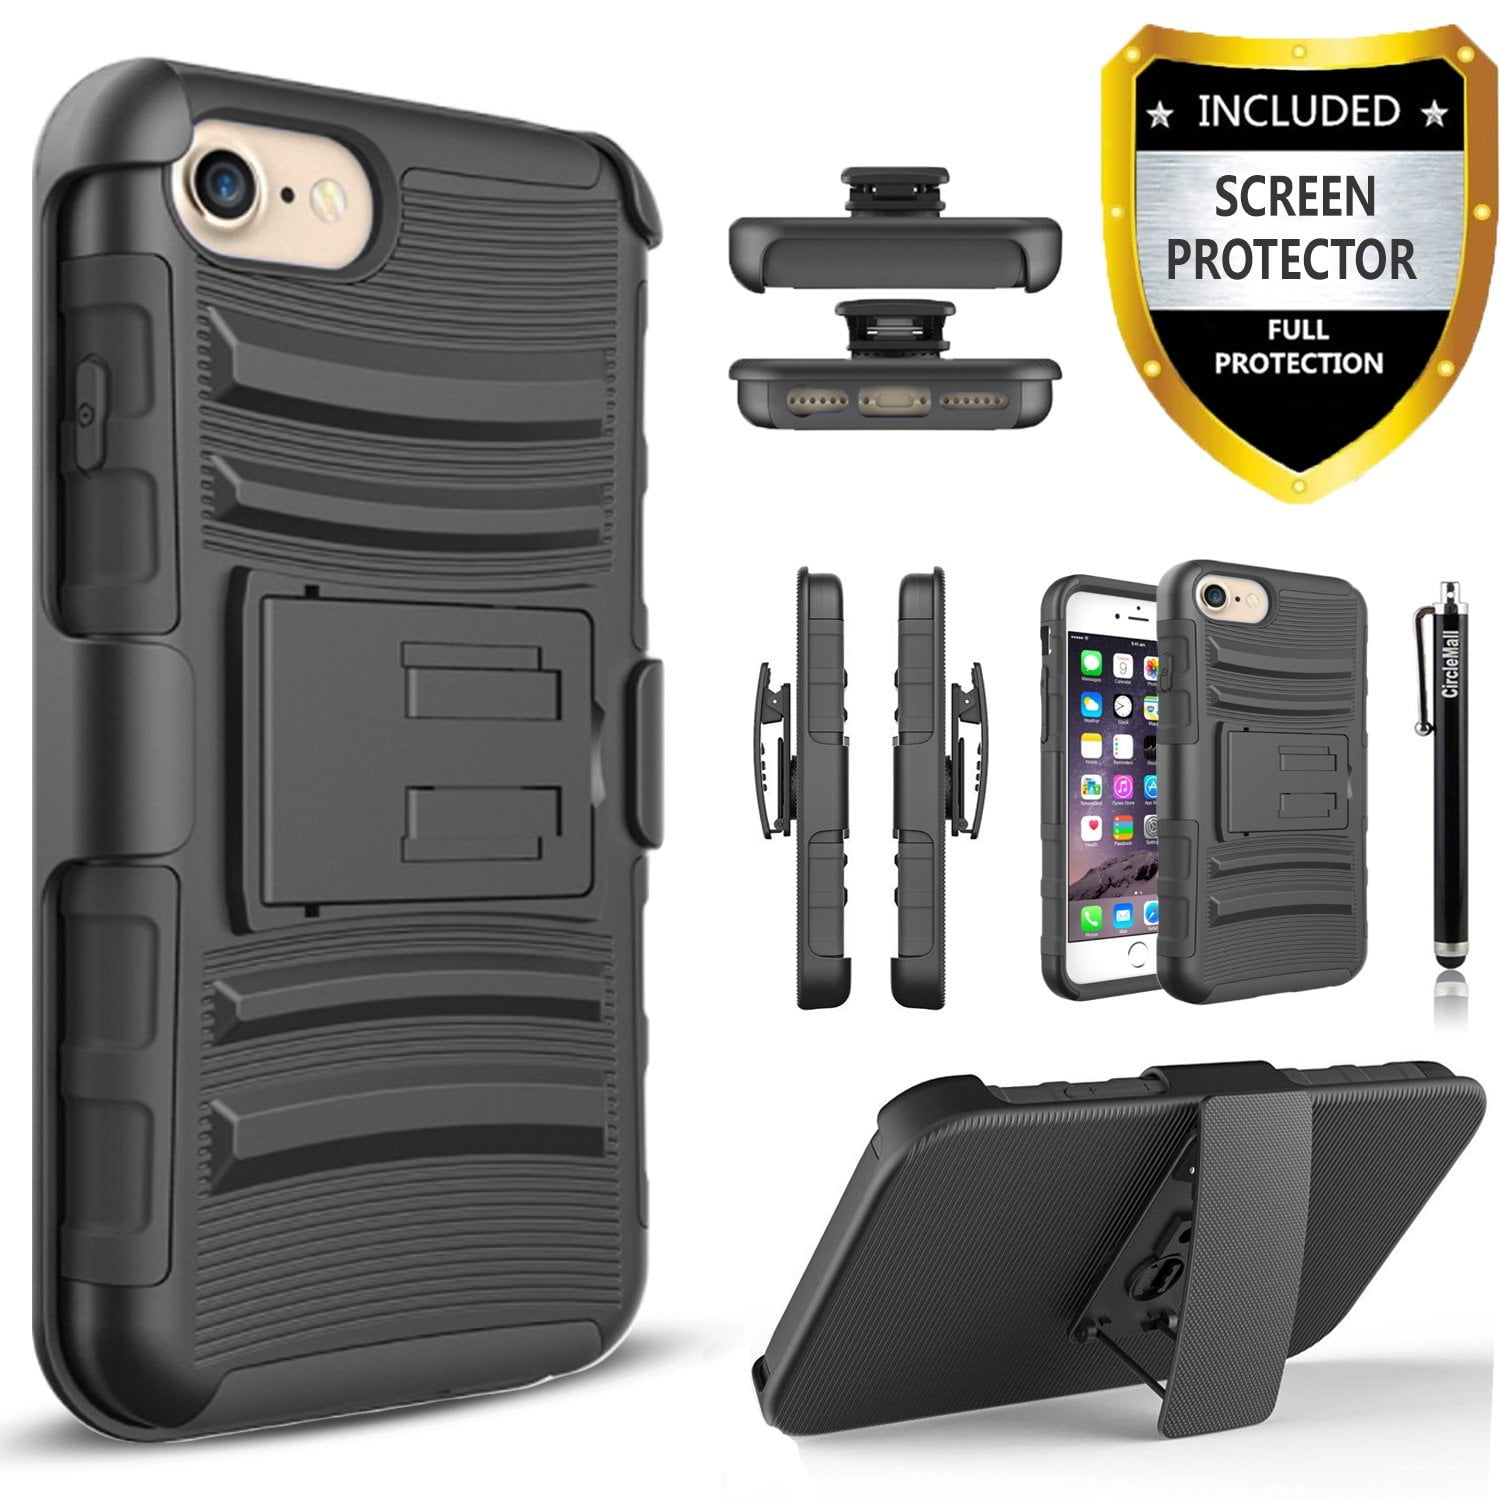 iPhone 8 Plus Phone Case, iPhone 7 Plus Phone Case, [Not Fit iPhone 7/8] with [Tempered Glass Screen Protector] 2-Piece Style Hybrid Shockproof Hard Case Cover Hybird Shockproof (Black)